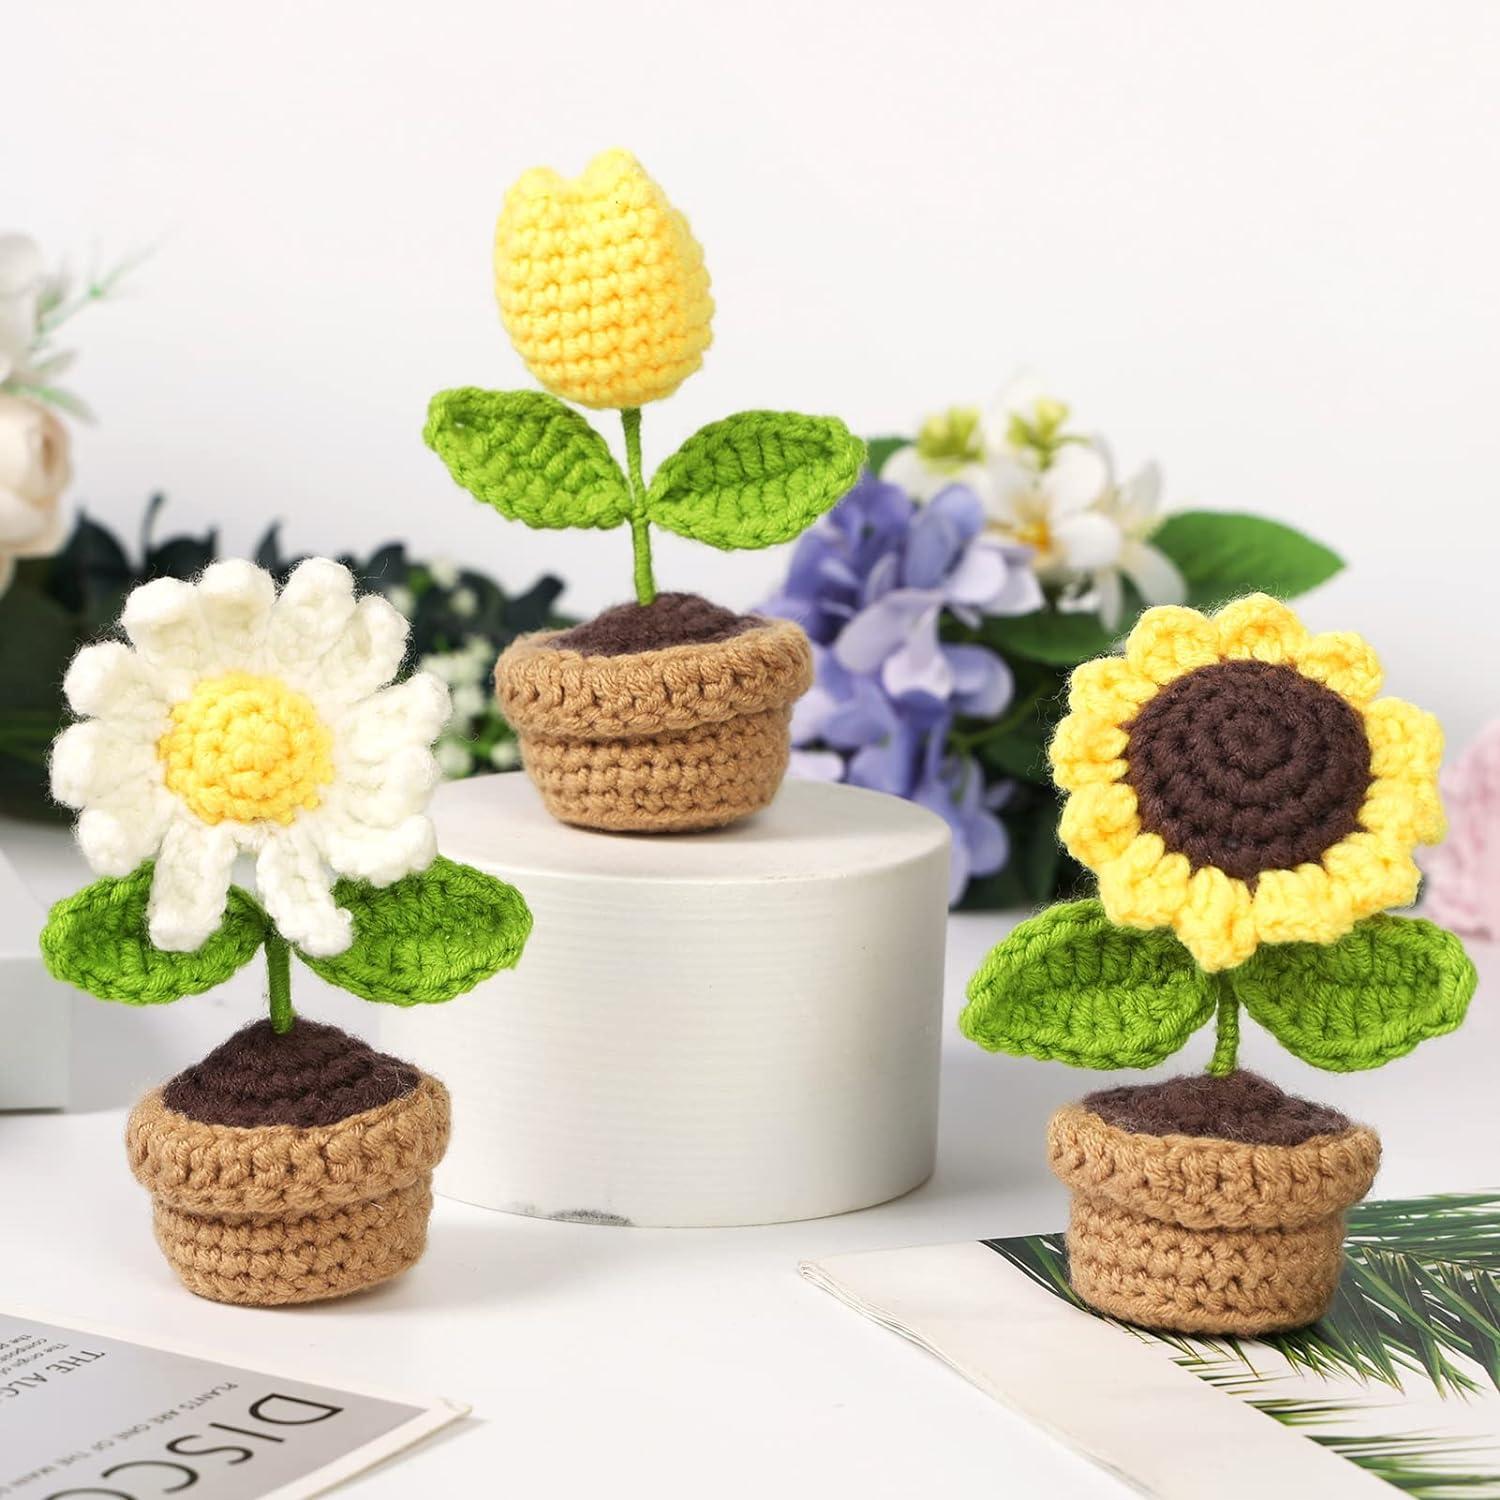 PP OPOUNT Beginner Crochet Kit - 3 PCS Potted Plants Complete Crochet Kit  for Beginners Starter Pack for Adults and Kids with Step-by-Step  Instructions and Video Tutorials (Patent Product)